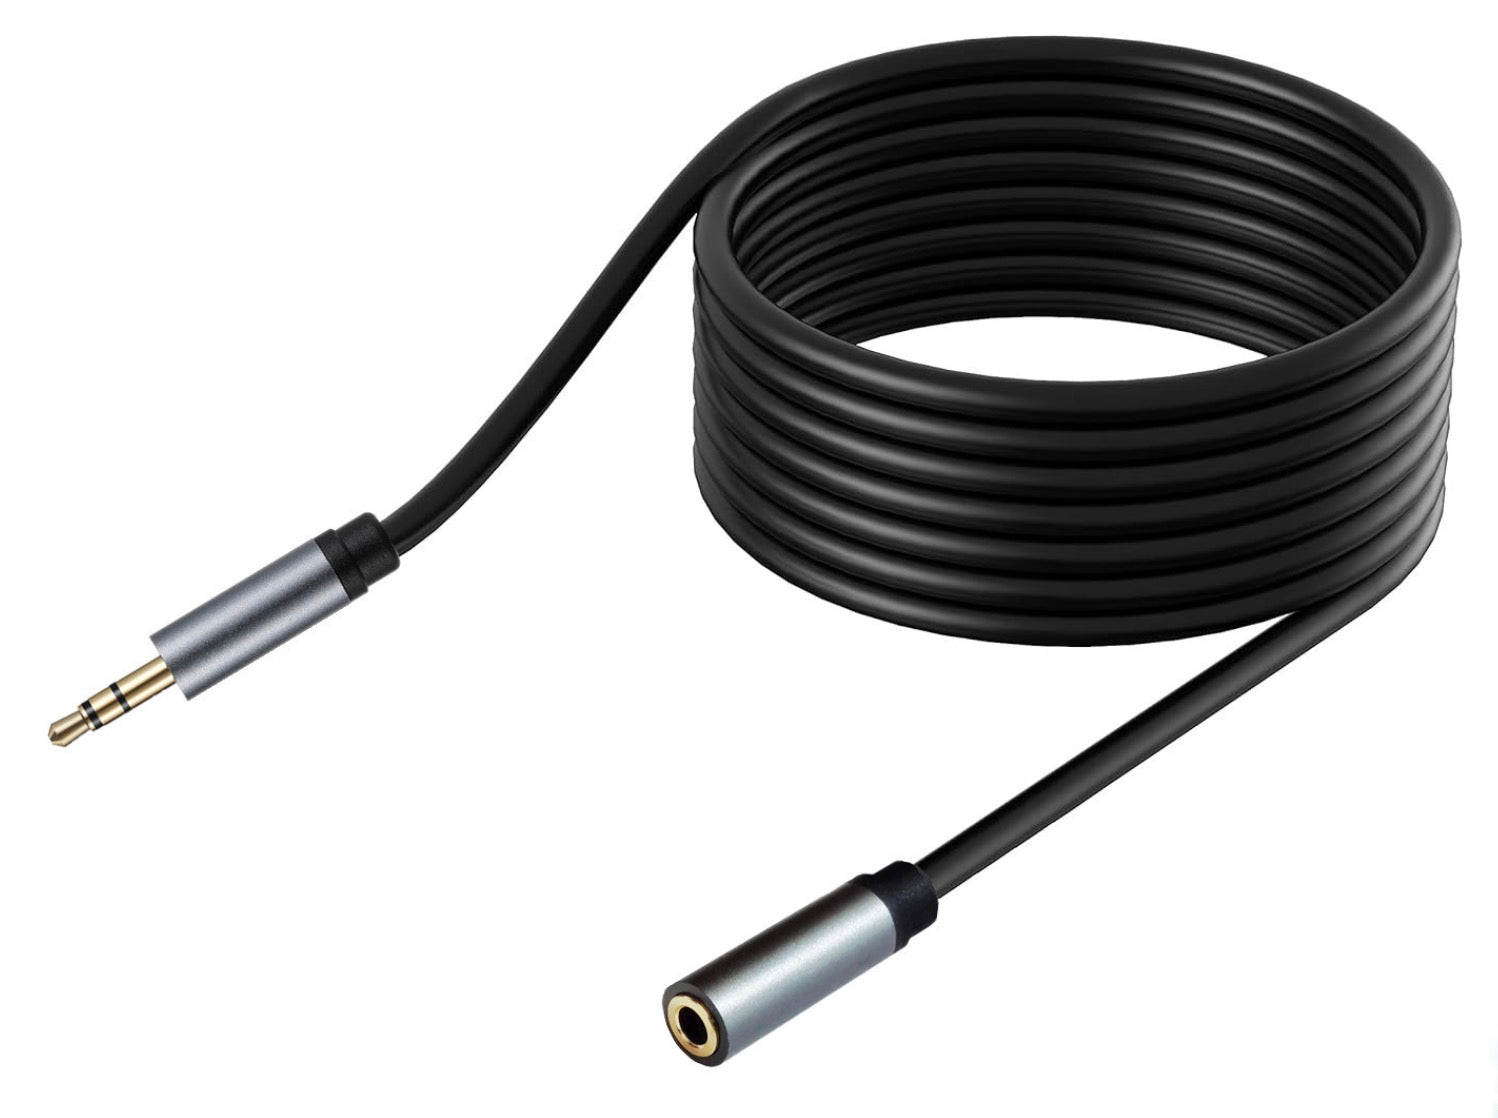 3.5mm 3 Pole Male to Female Headphone AUX Audio Extension Cable